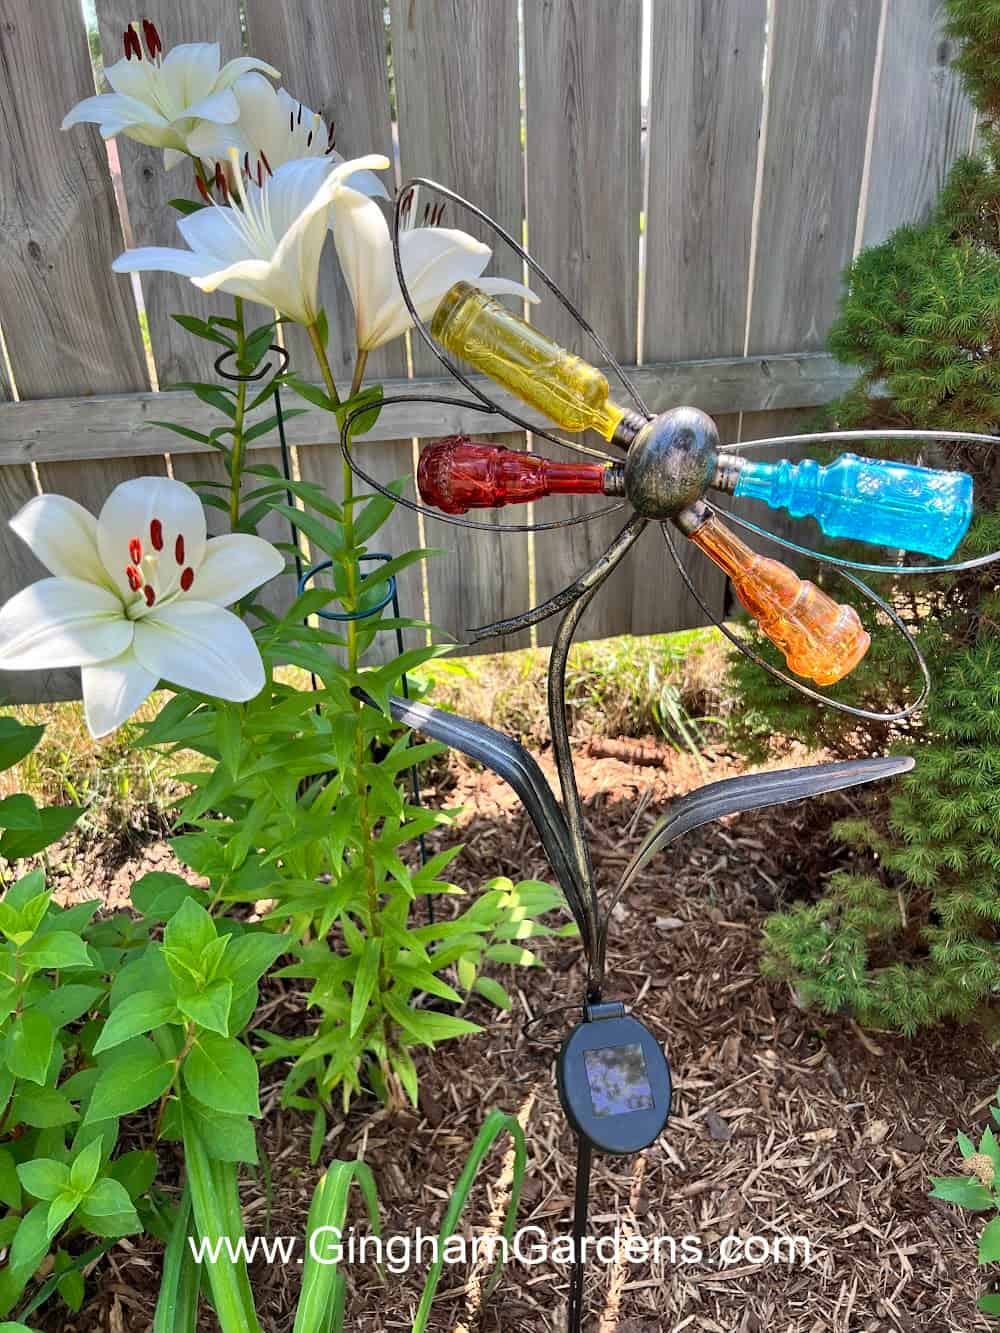 Decorative solar garden stake made with small colorful bottles in the shape of a butterfly.